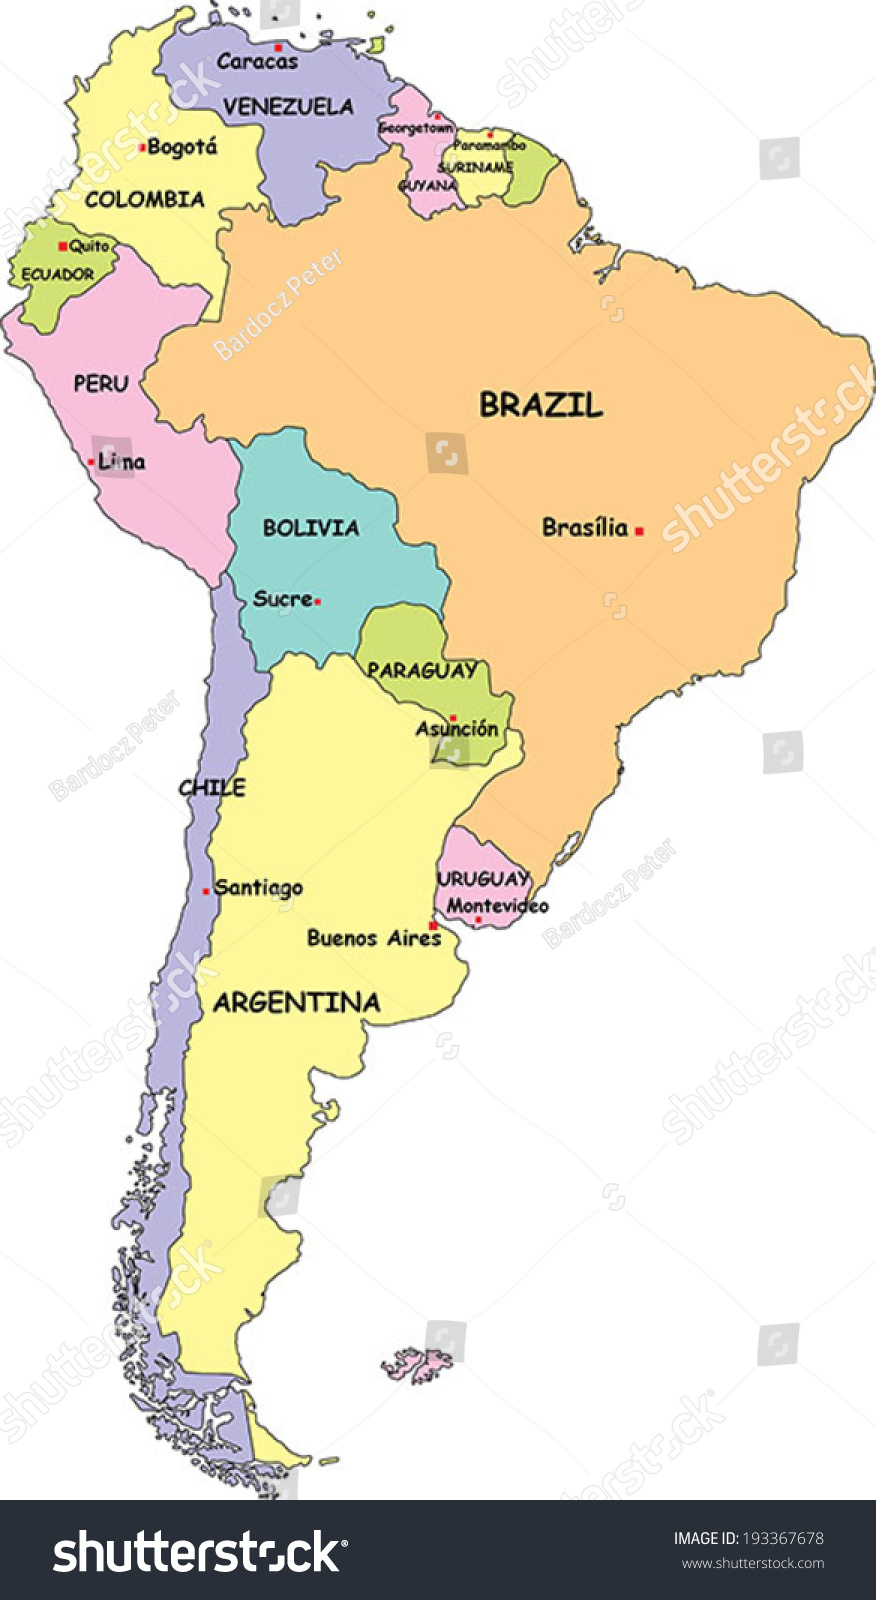 Highly Detailed South America Political Map Stock Vector 193367678 ...